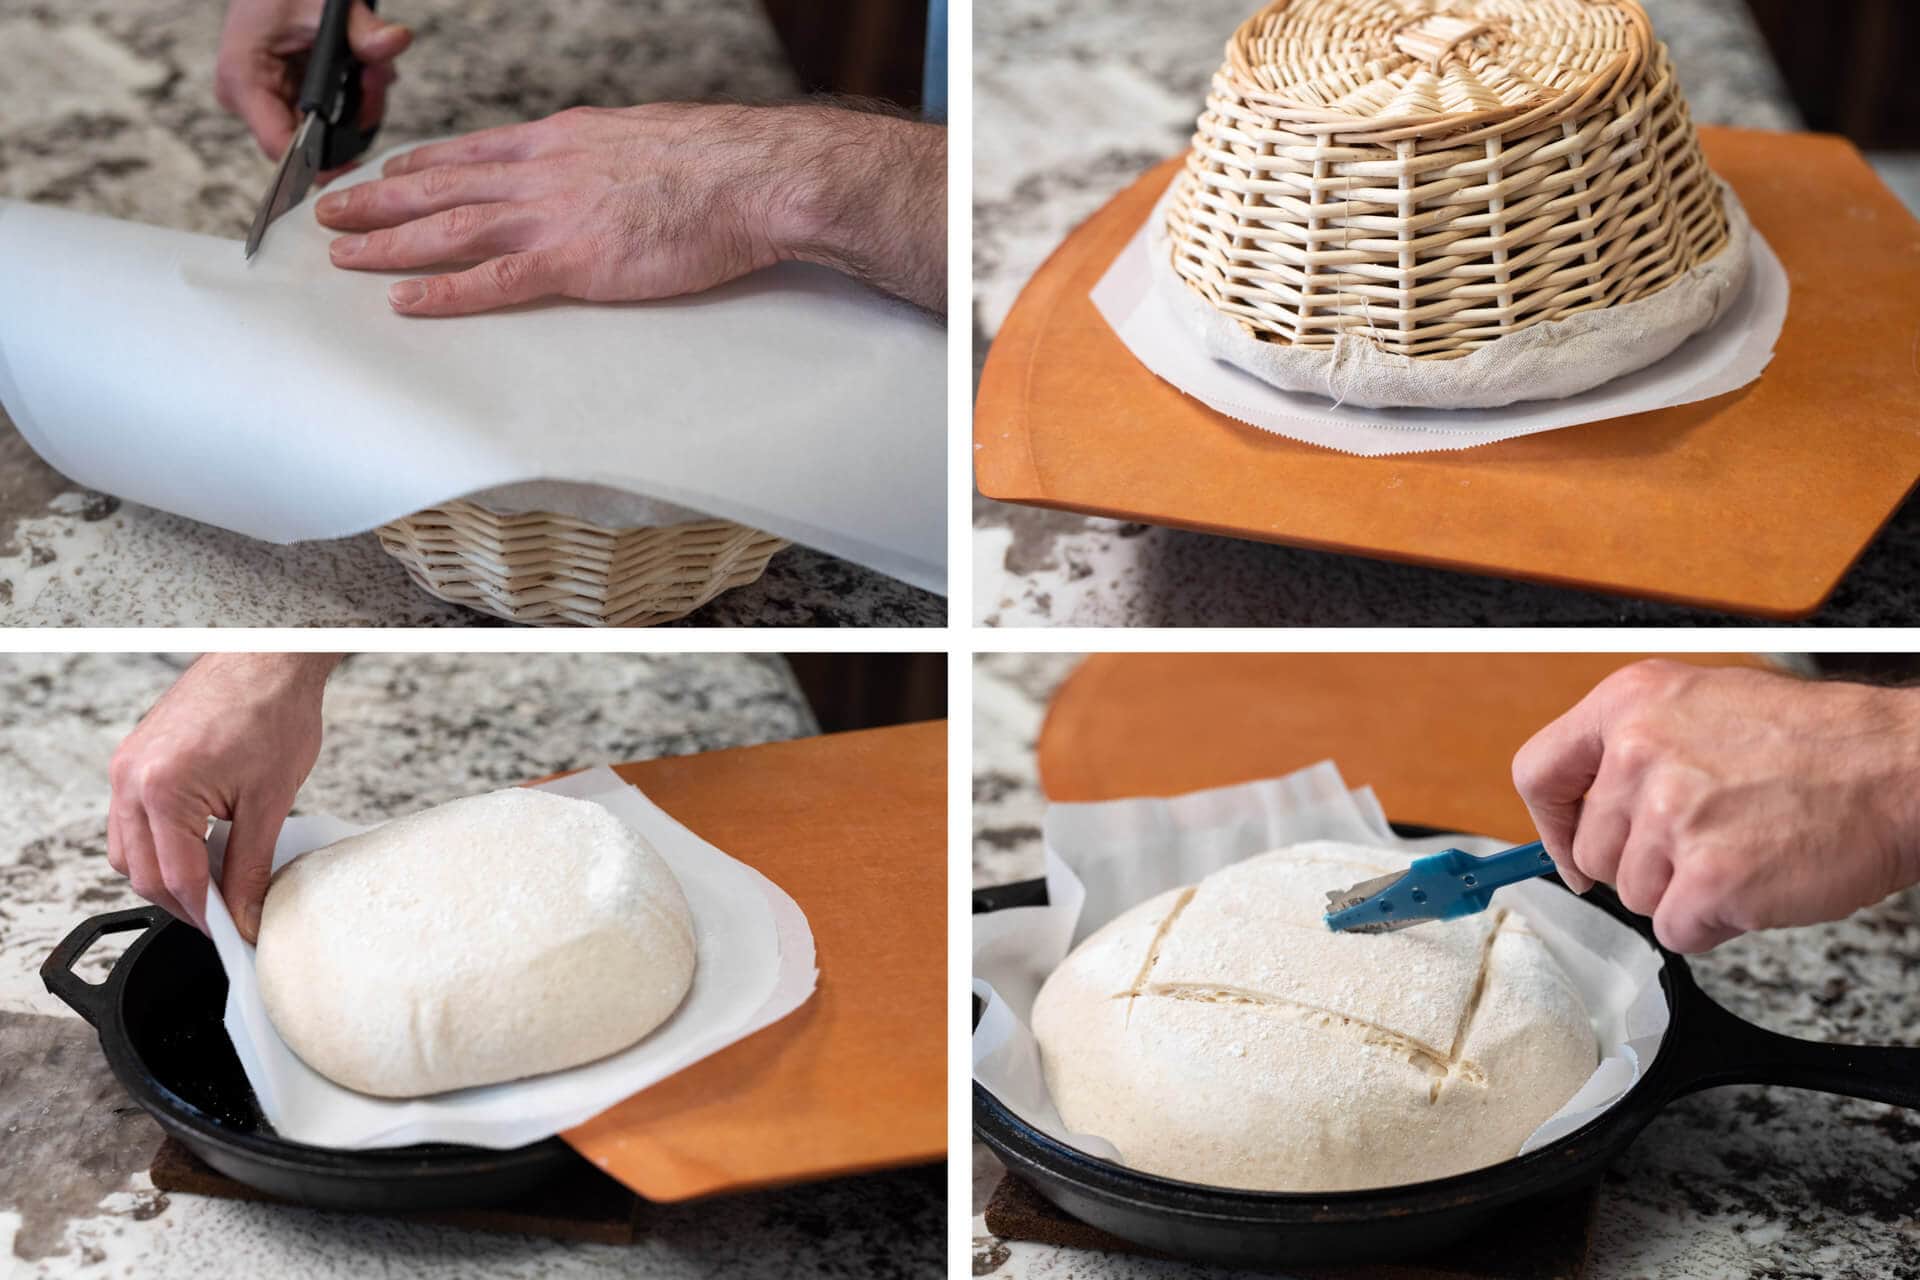 How To Bake Bread in a Dutch Oven